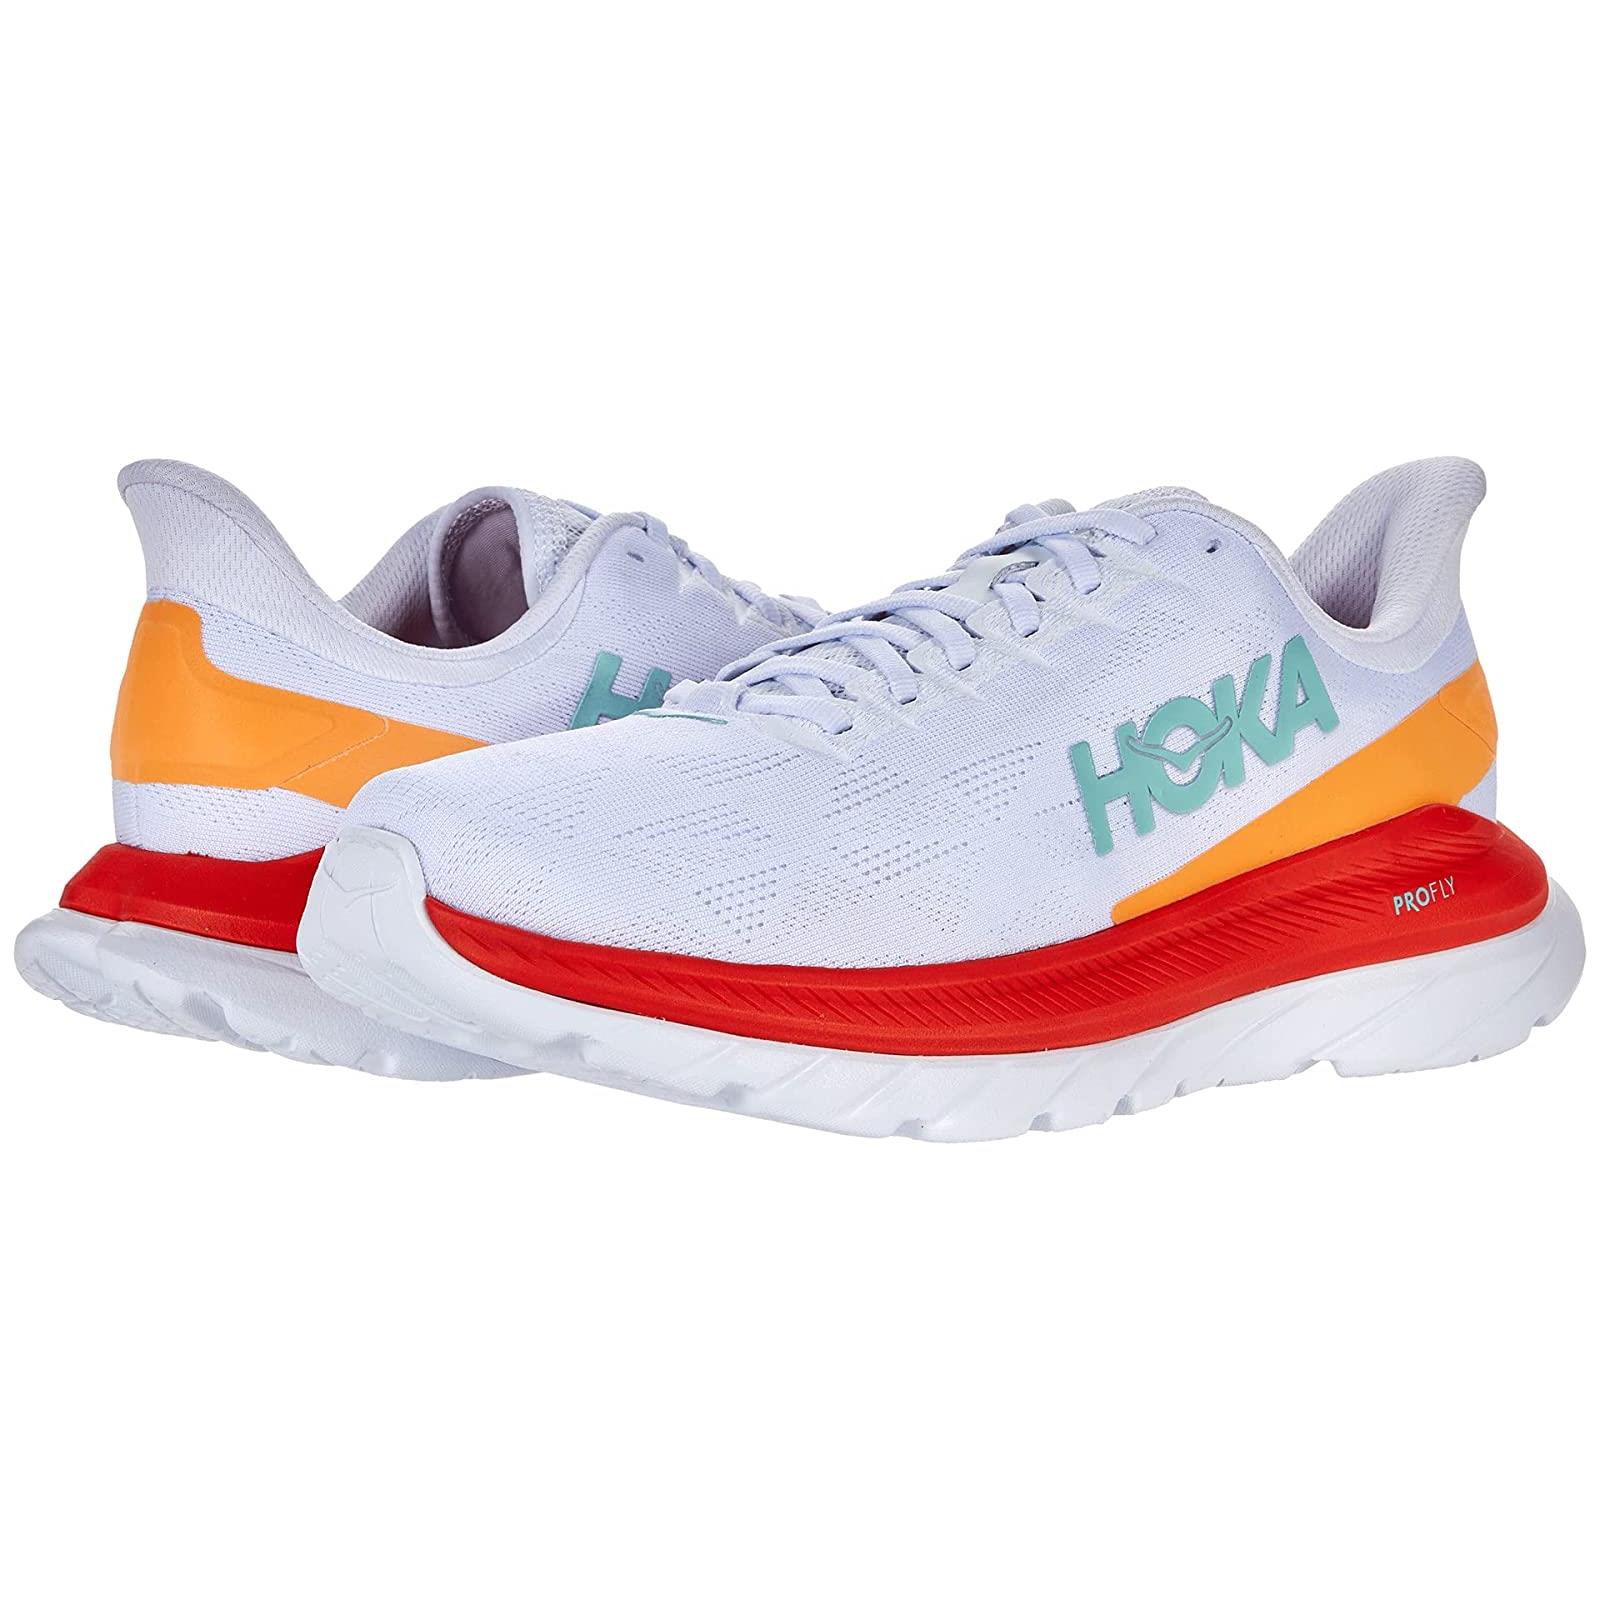 Man`s Sneakers Athletic Shoes Hoka One One Mach 4 White/Fiesta